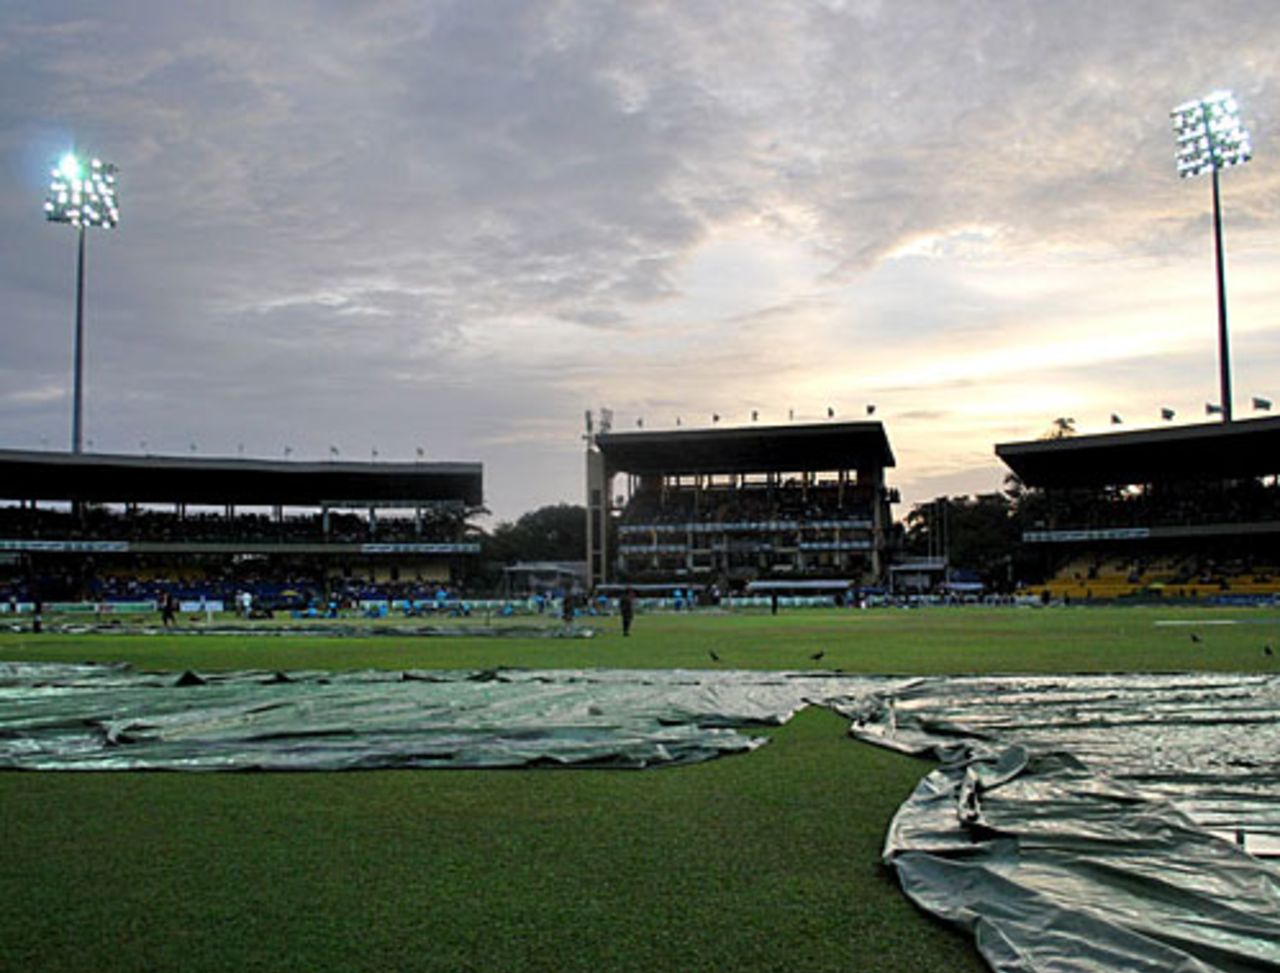 The covers are on at the Premadasa, Colombo, September 4, 2009